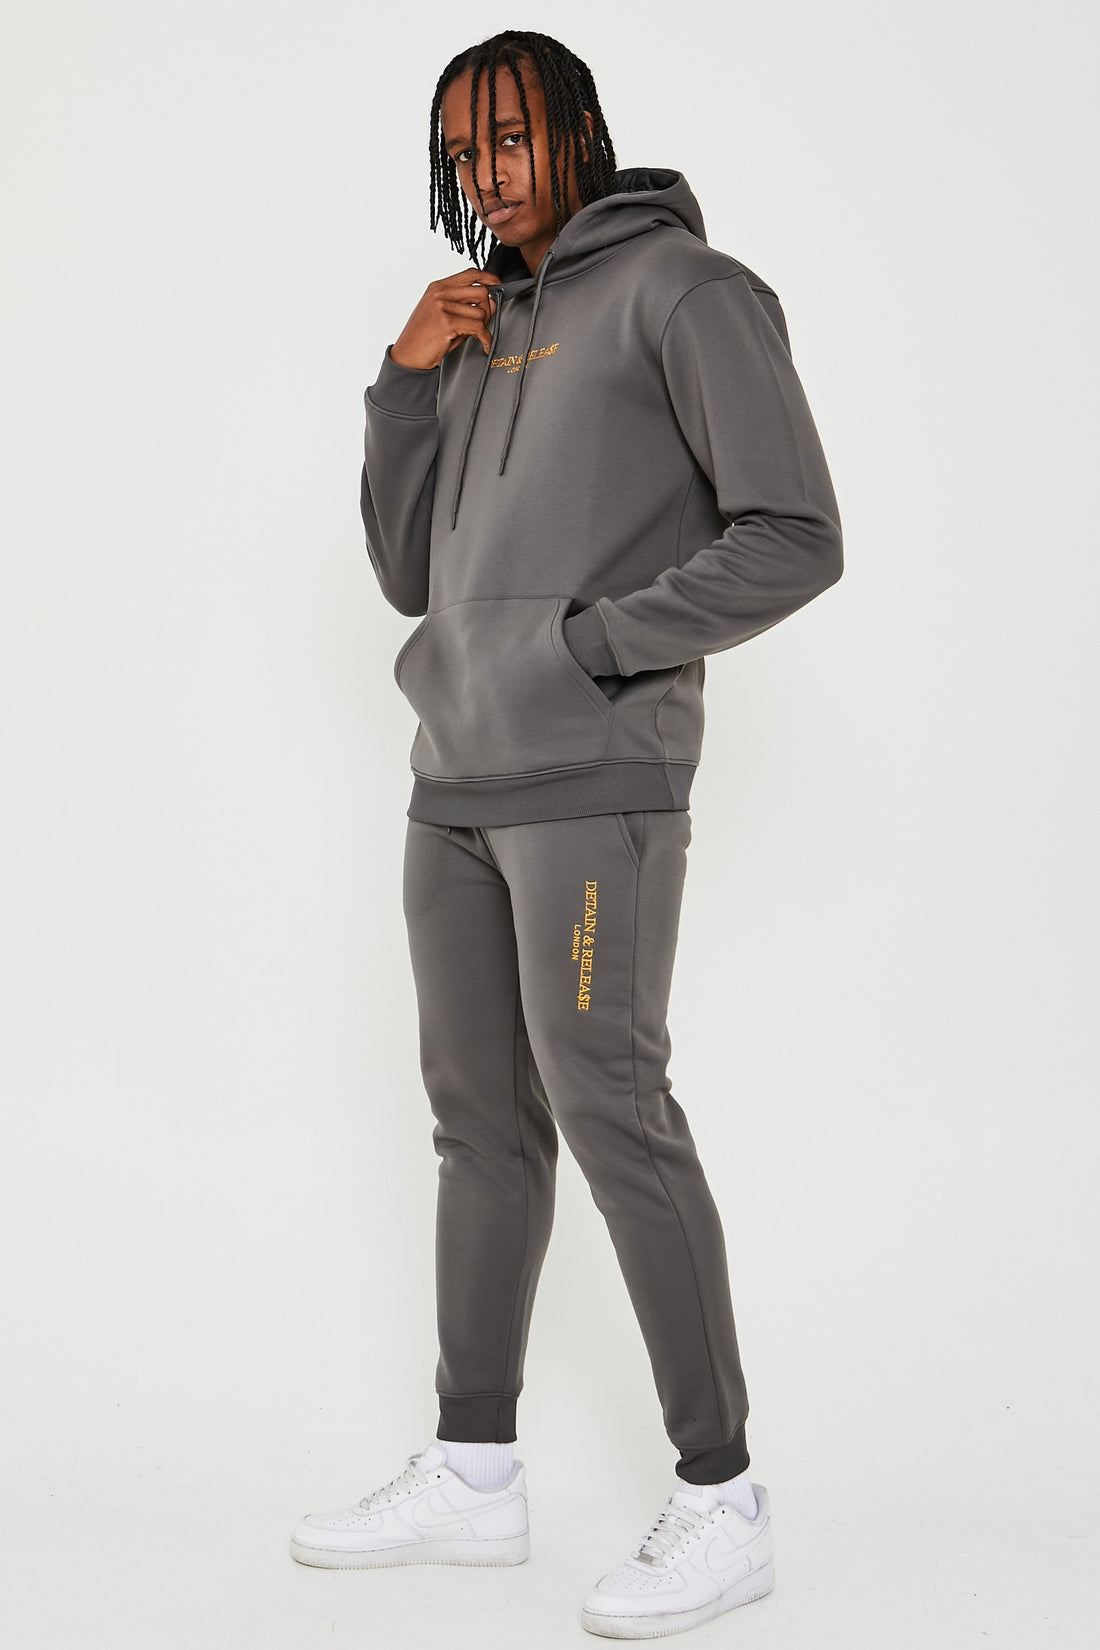 Detain & Release Hooded Tracksuit - Charcoal